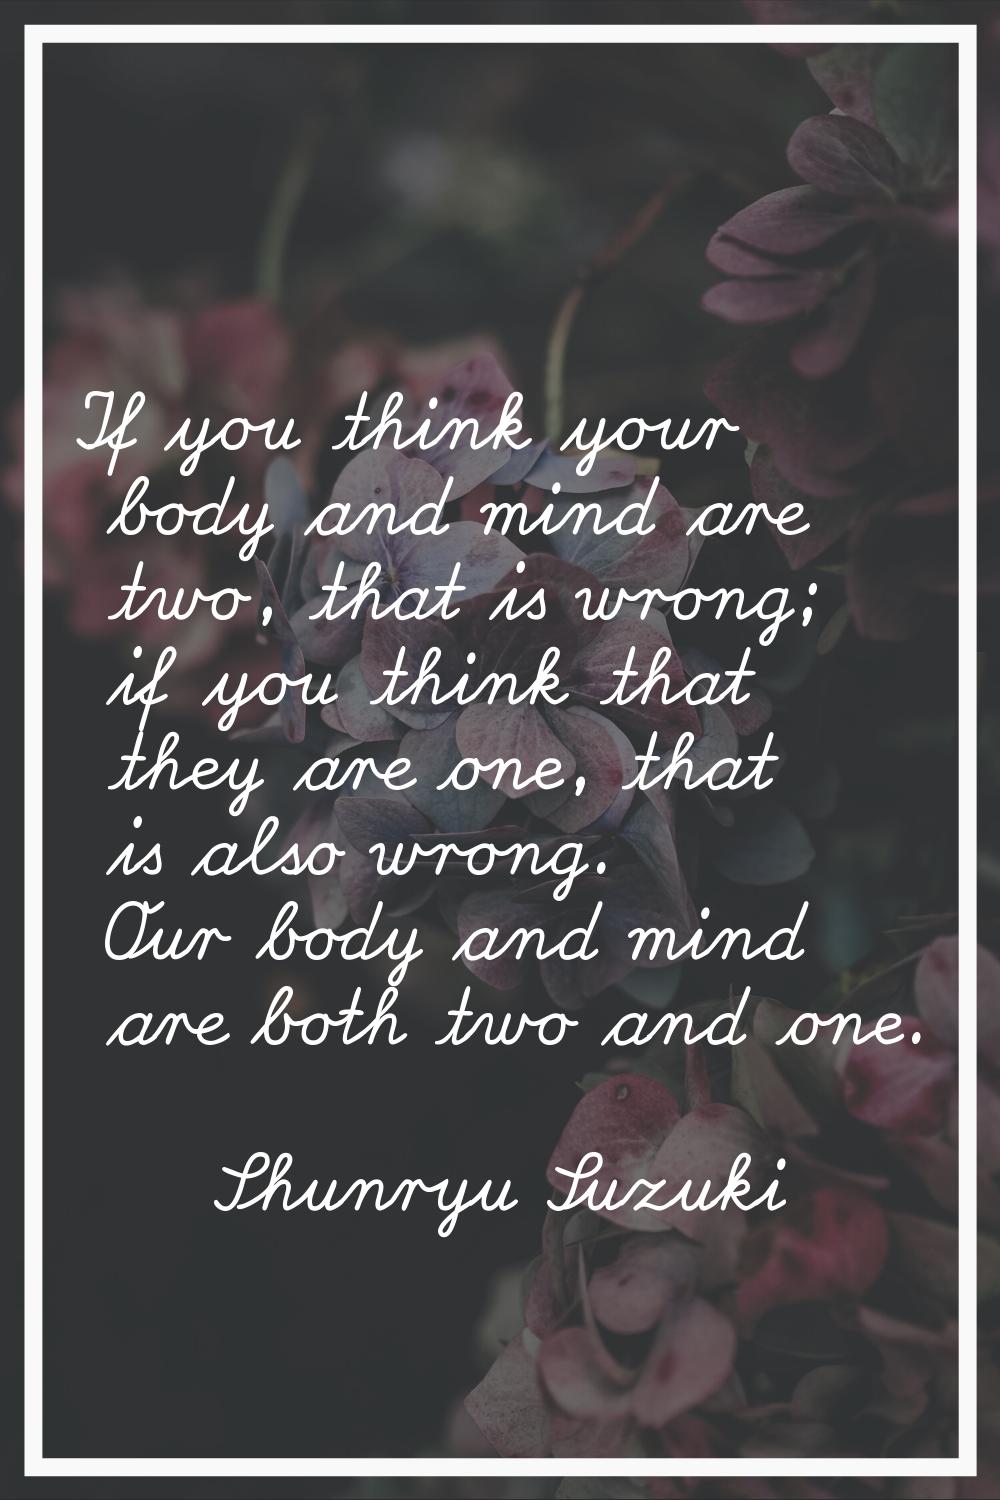 If you think your body and mind are two, that is wrong; if you think that they are one, that is als